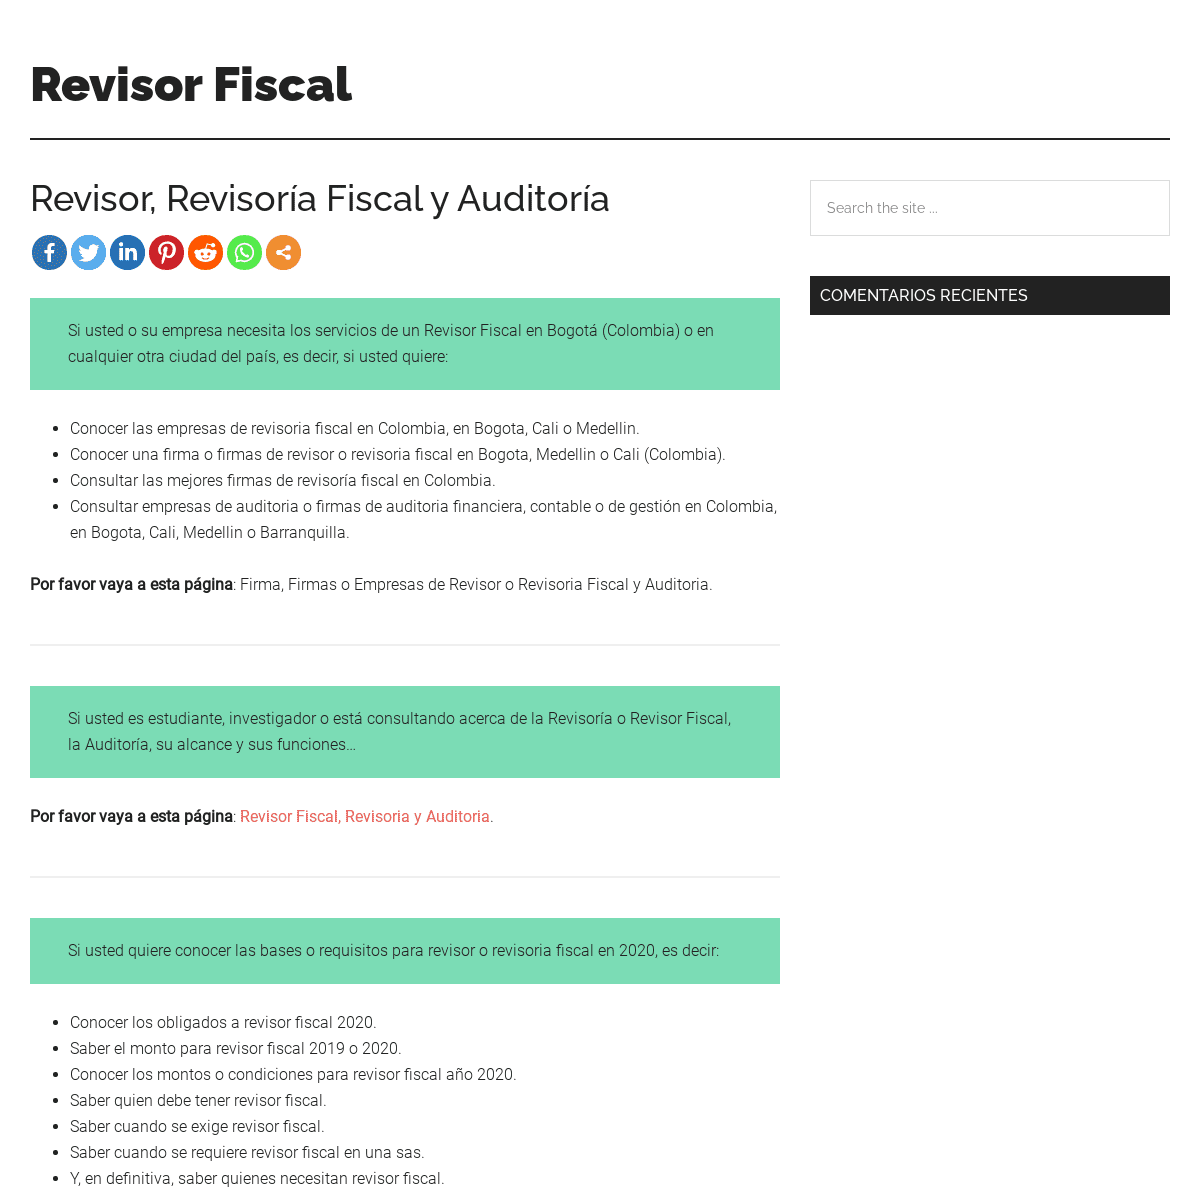 A complete backup of https://revisorfiscal.com